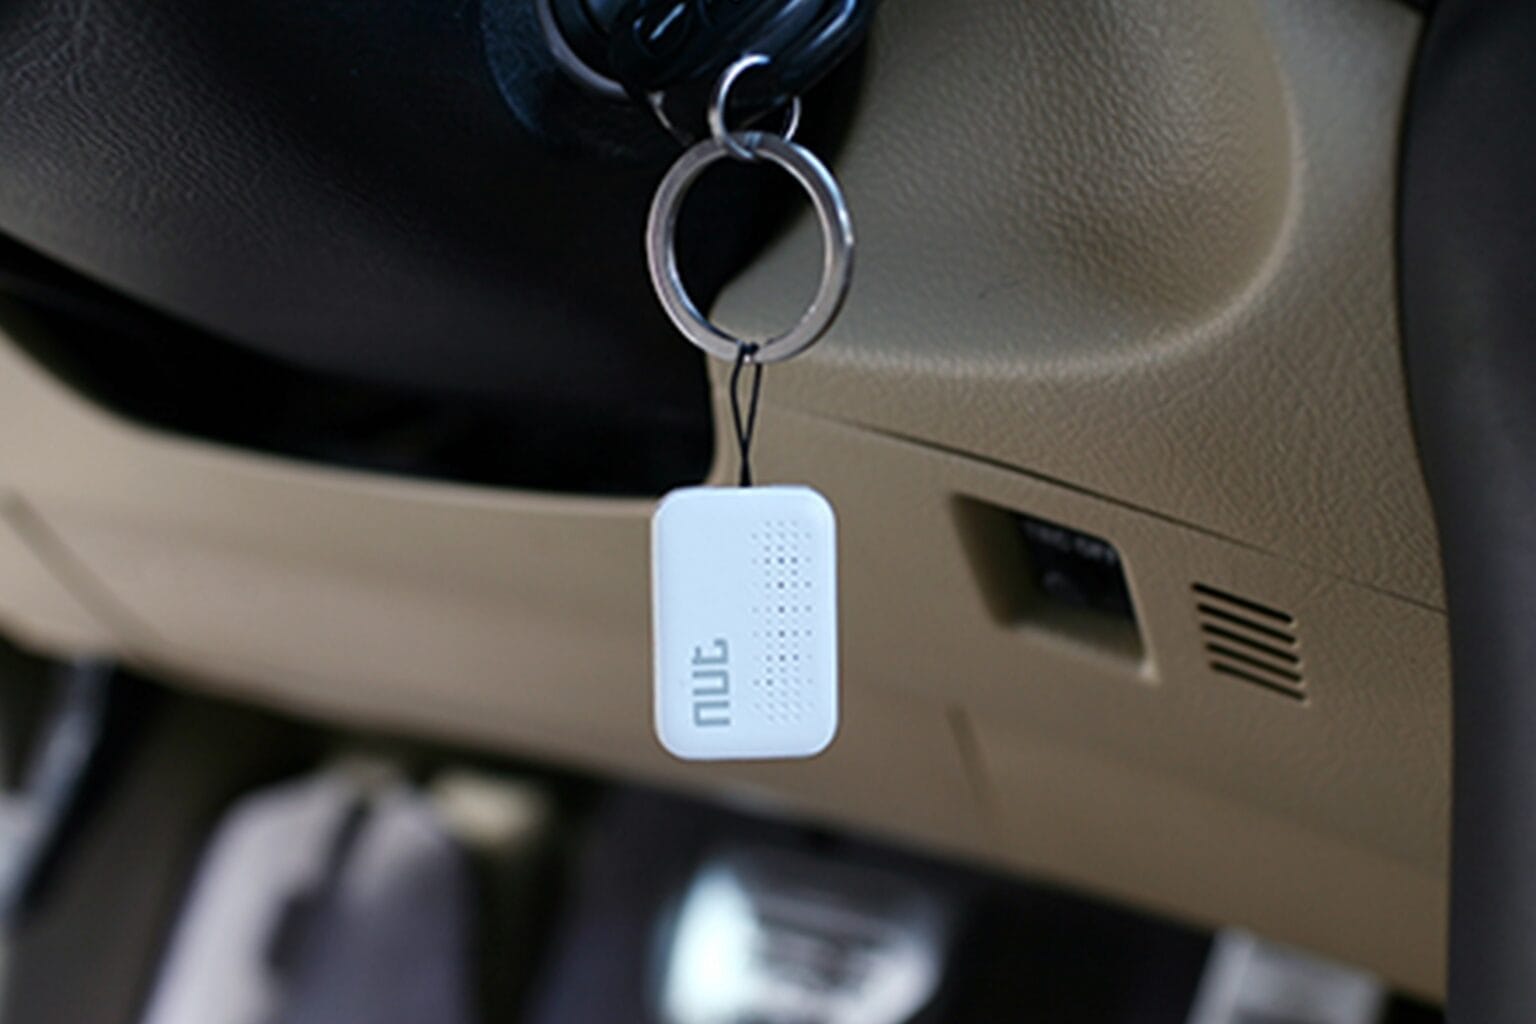 Never lose your stuff again with this tiny Bluetooth tracker, now 20% off.